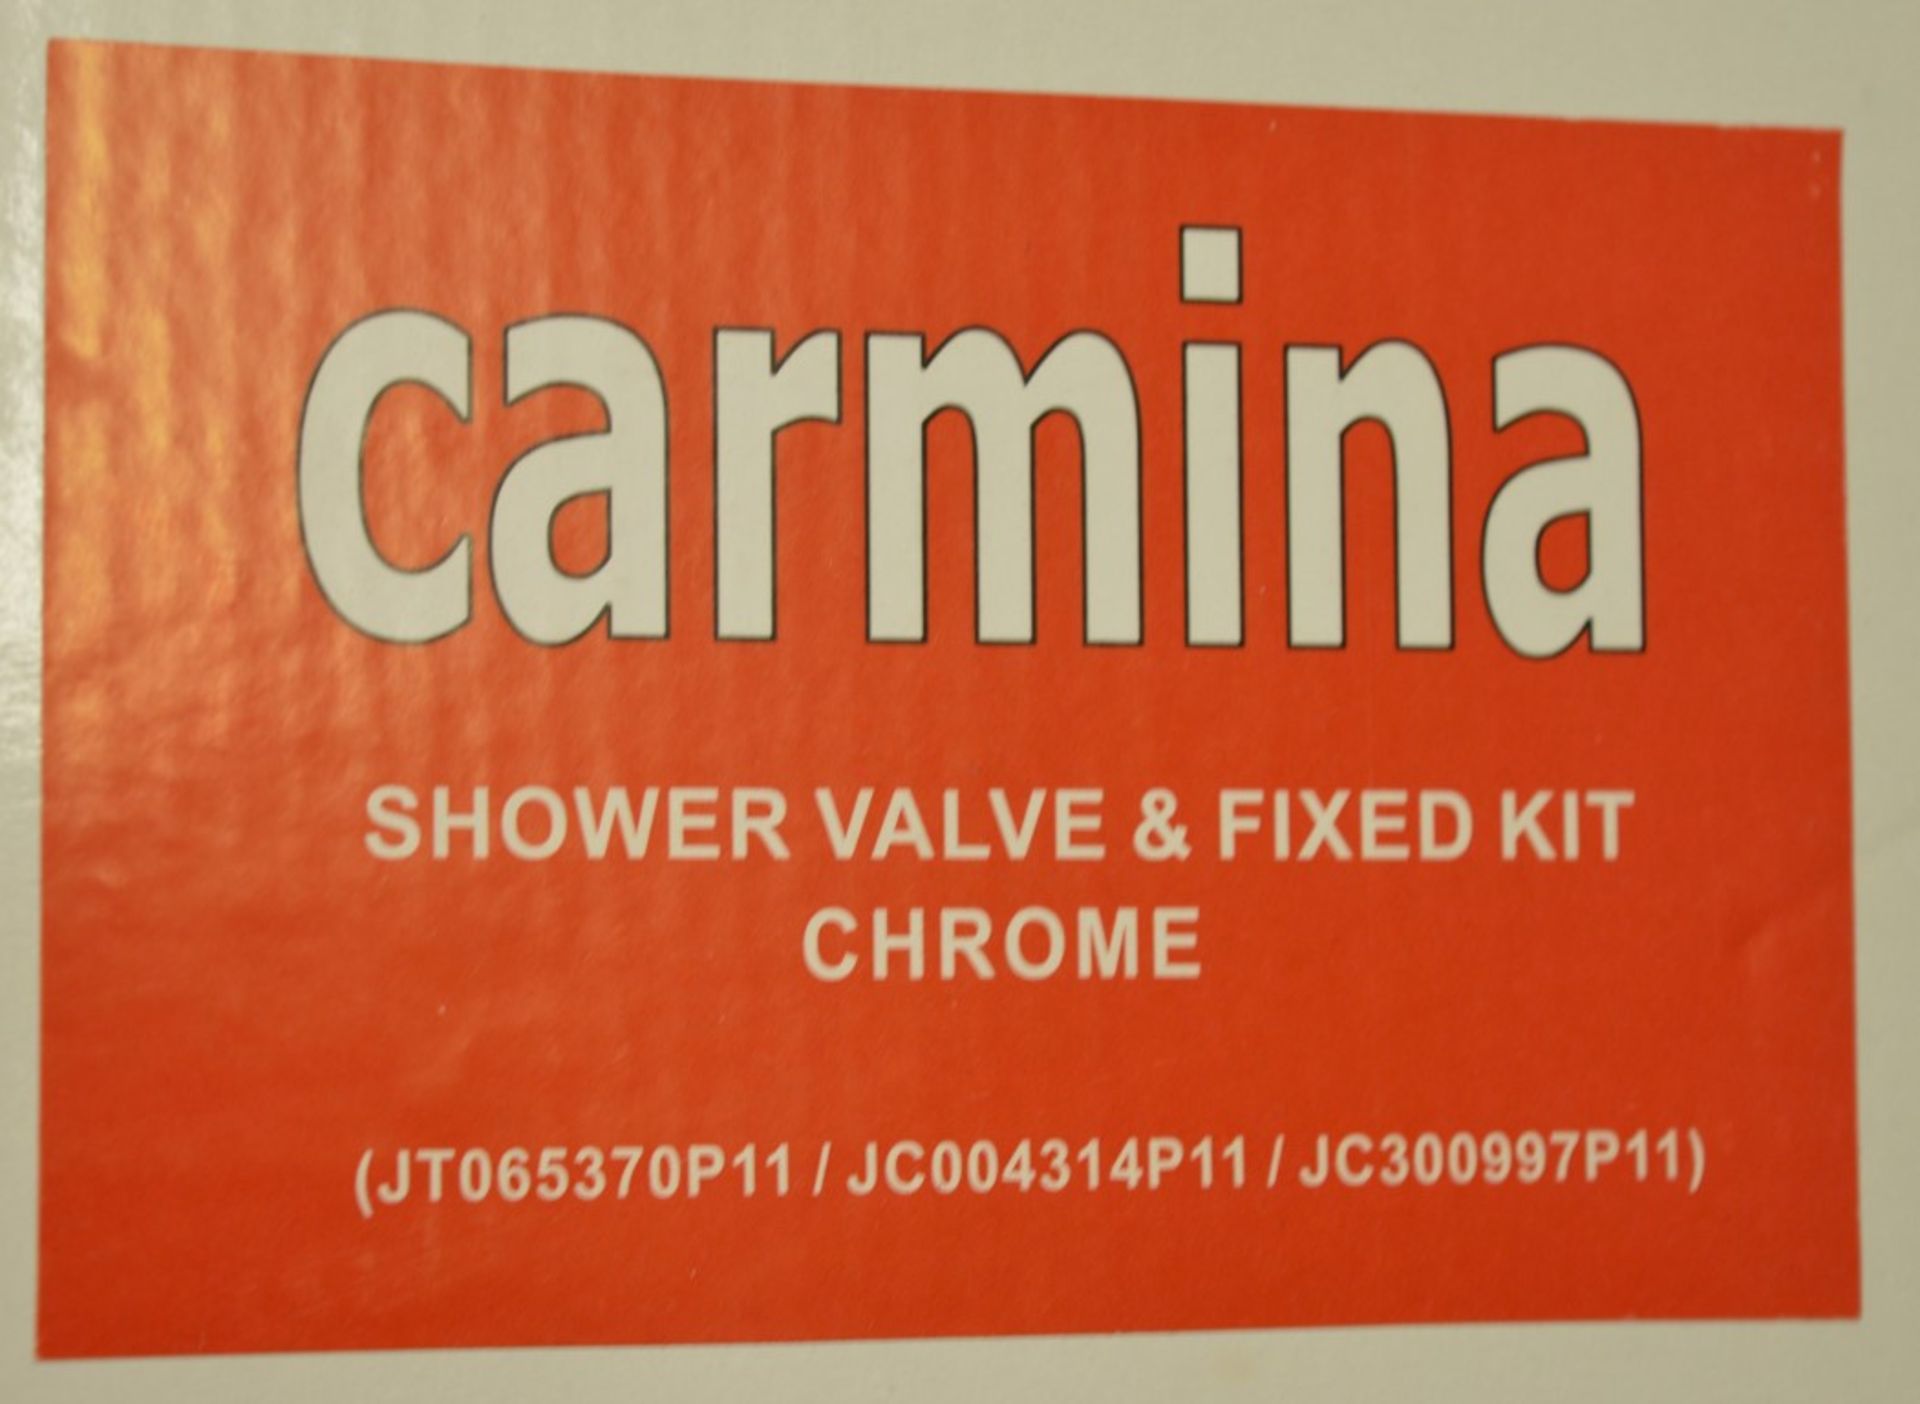 1 x Carmina Shower Valve Kit - Contains Chrome Shower Head, Fixed Arm and Manual Control - Brass - Image 10 of 11